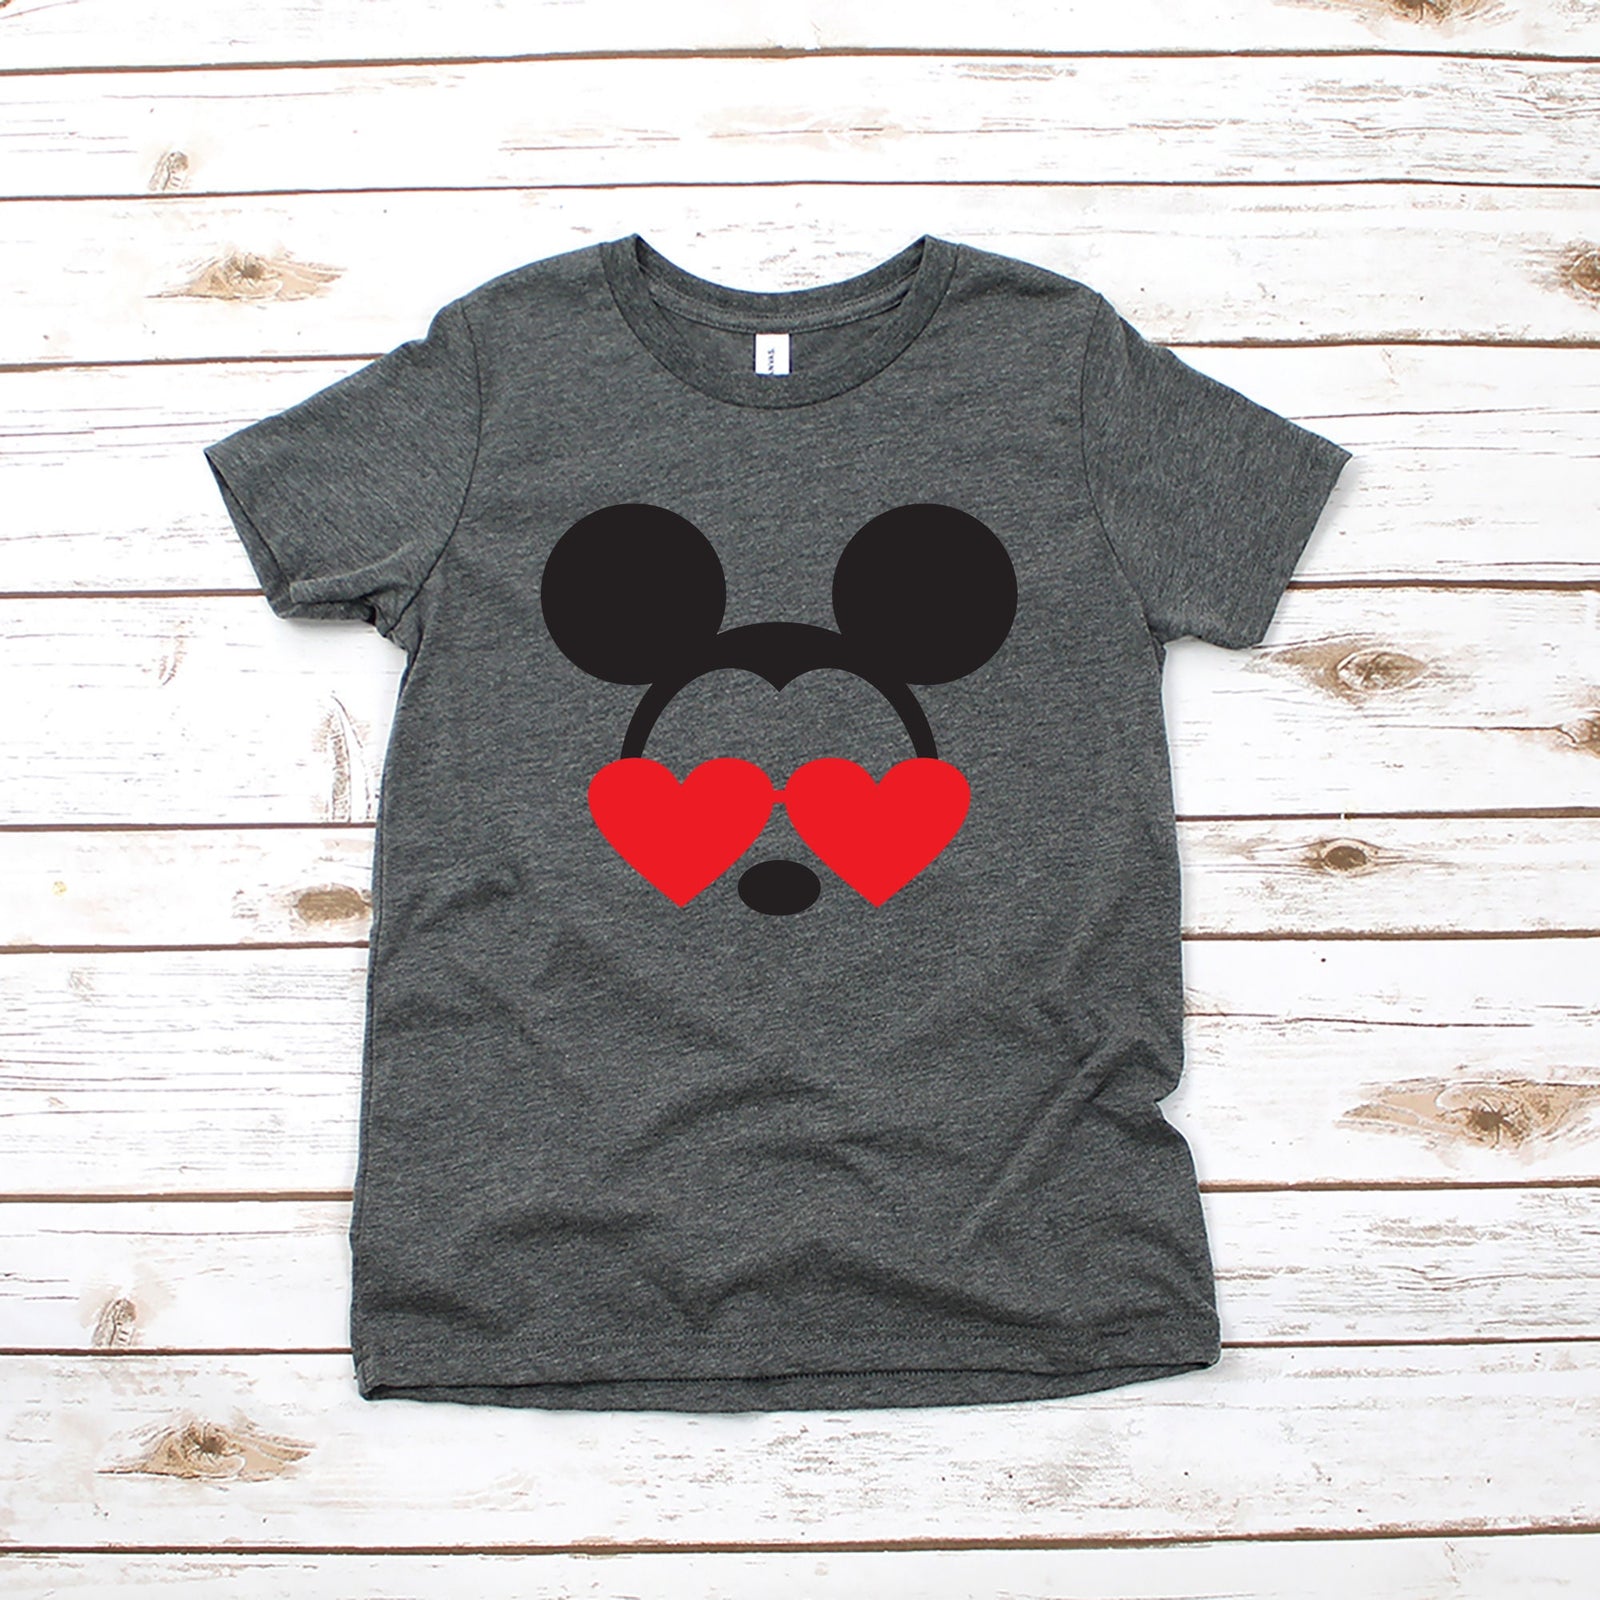 Valentine's Day Mickey Mouse Youth T Shirt -Infant Toddlers and Kids Disney T Shirts - Heart Glasses